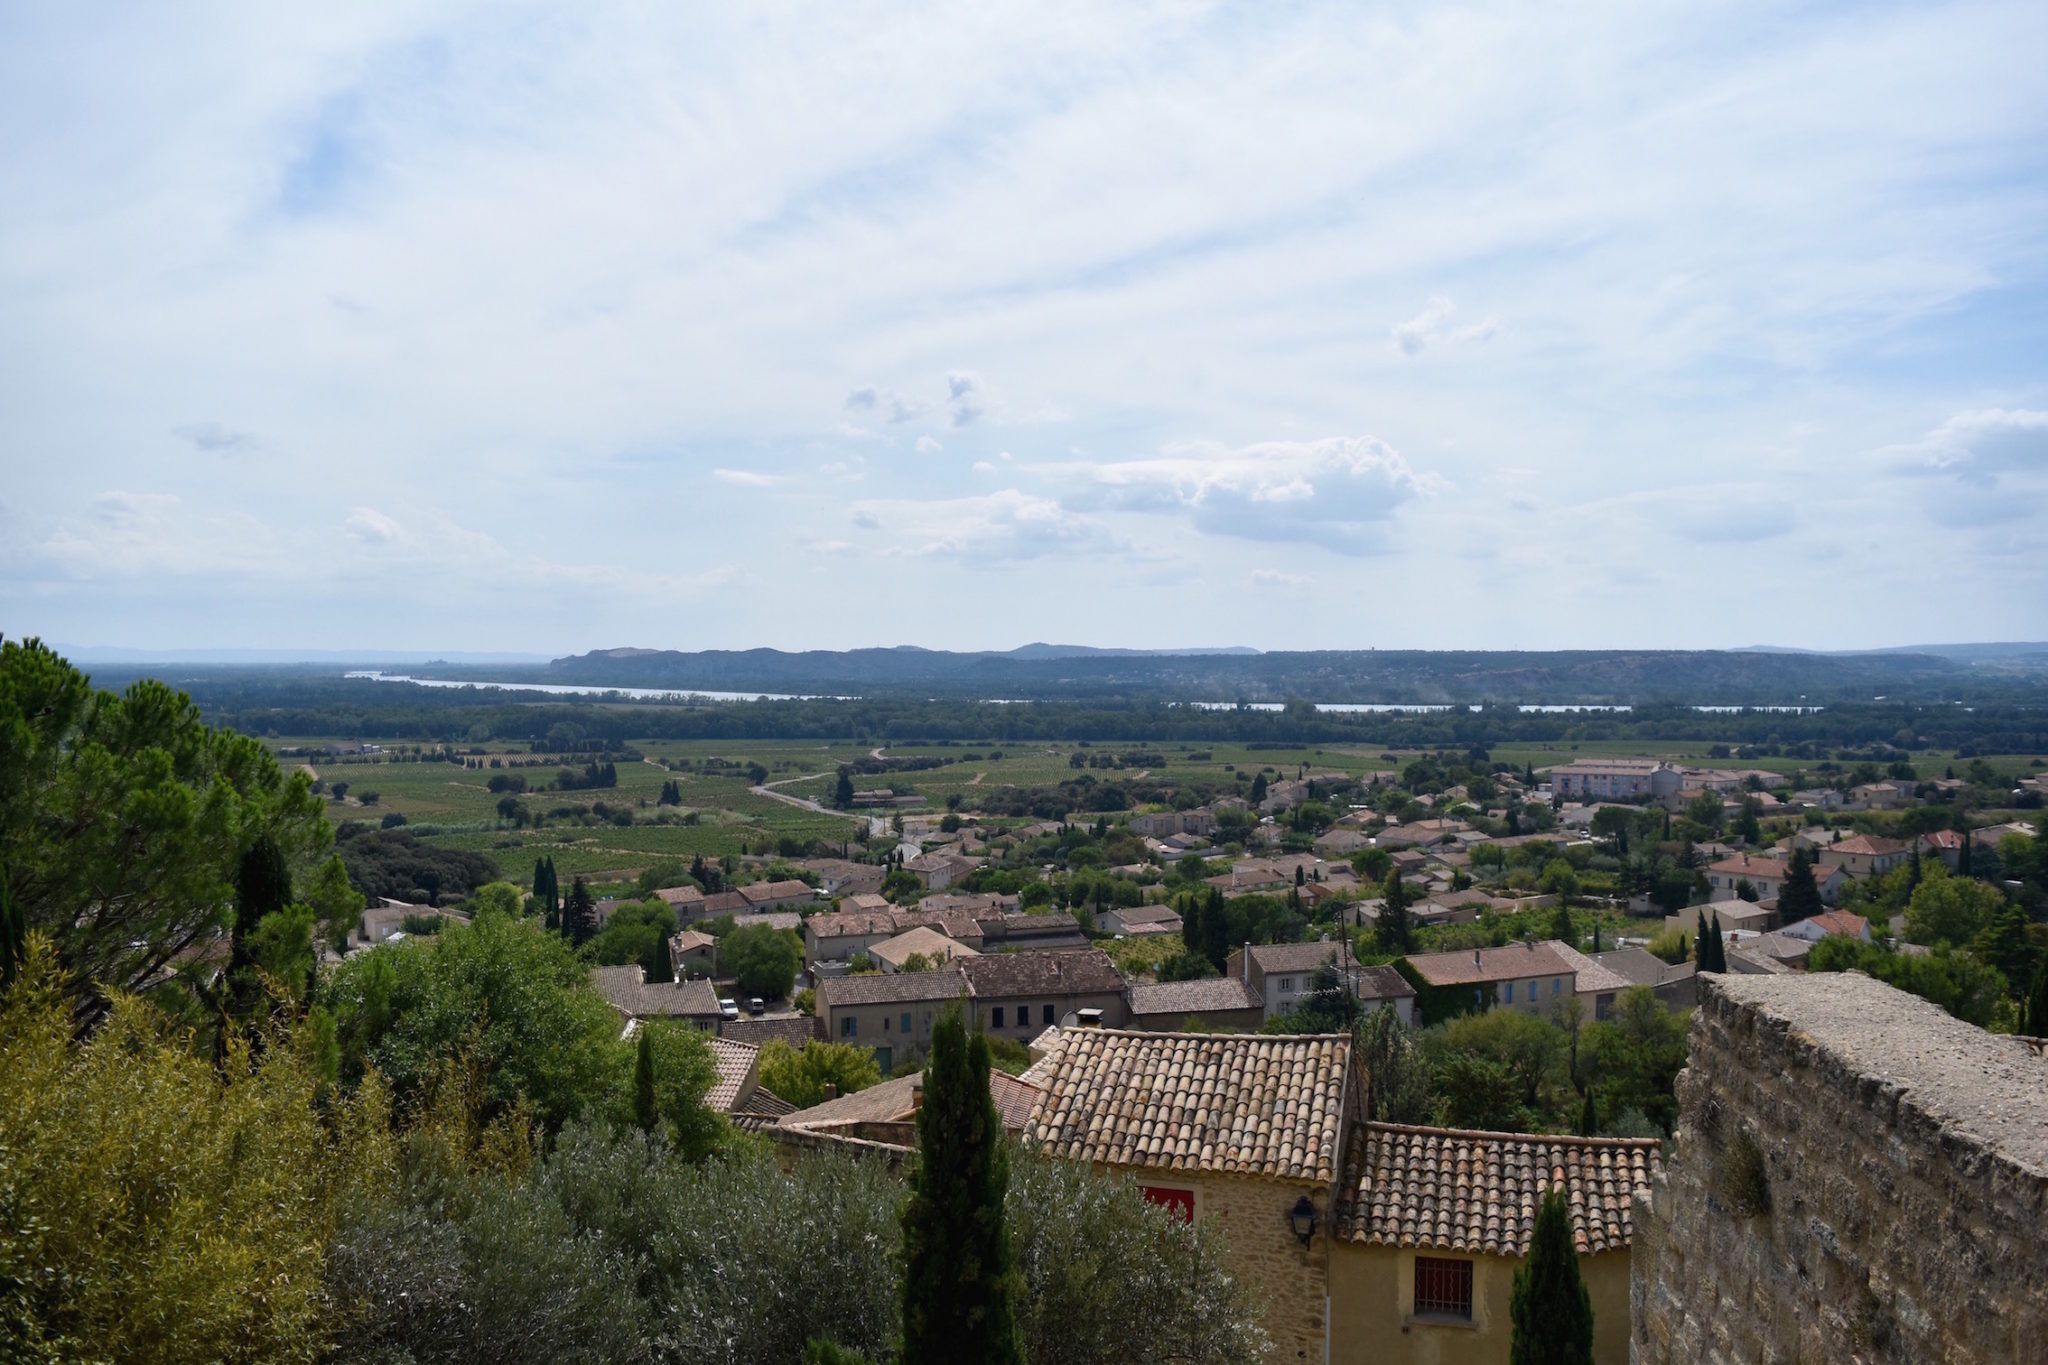 Views of Châteauneuf-du-Pape and the Rhone Valley from above